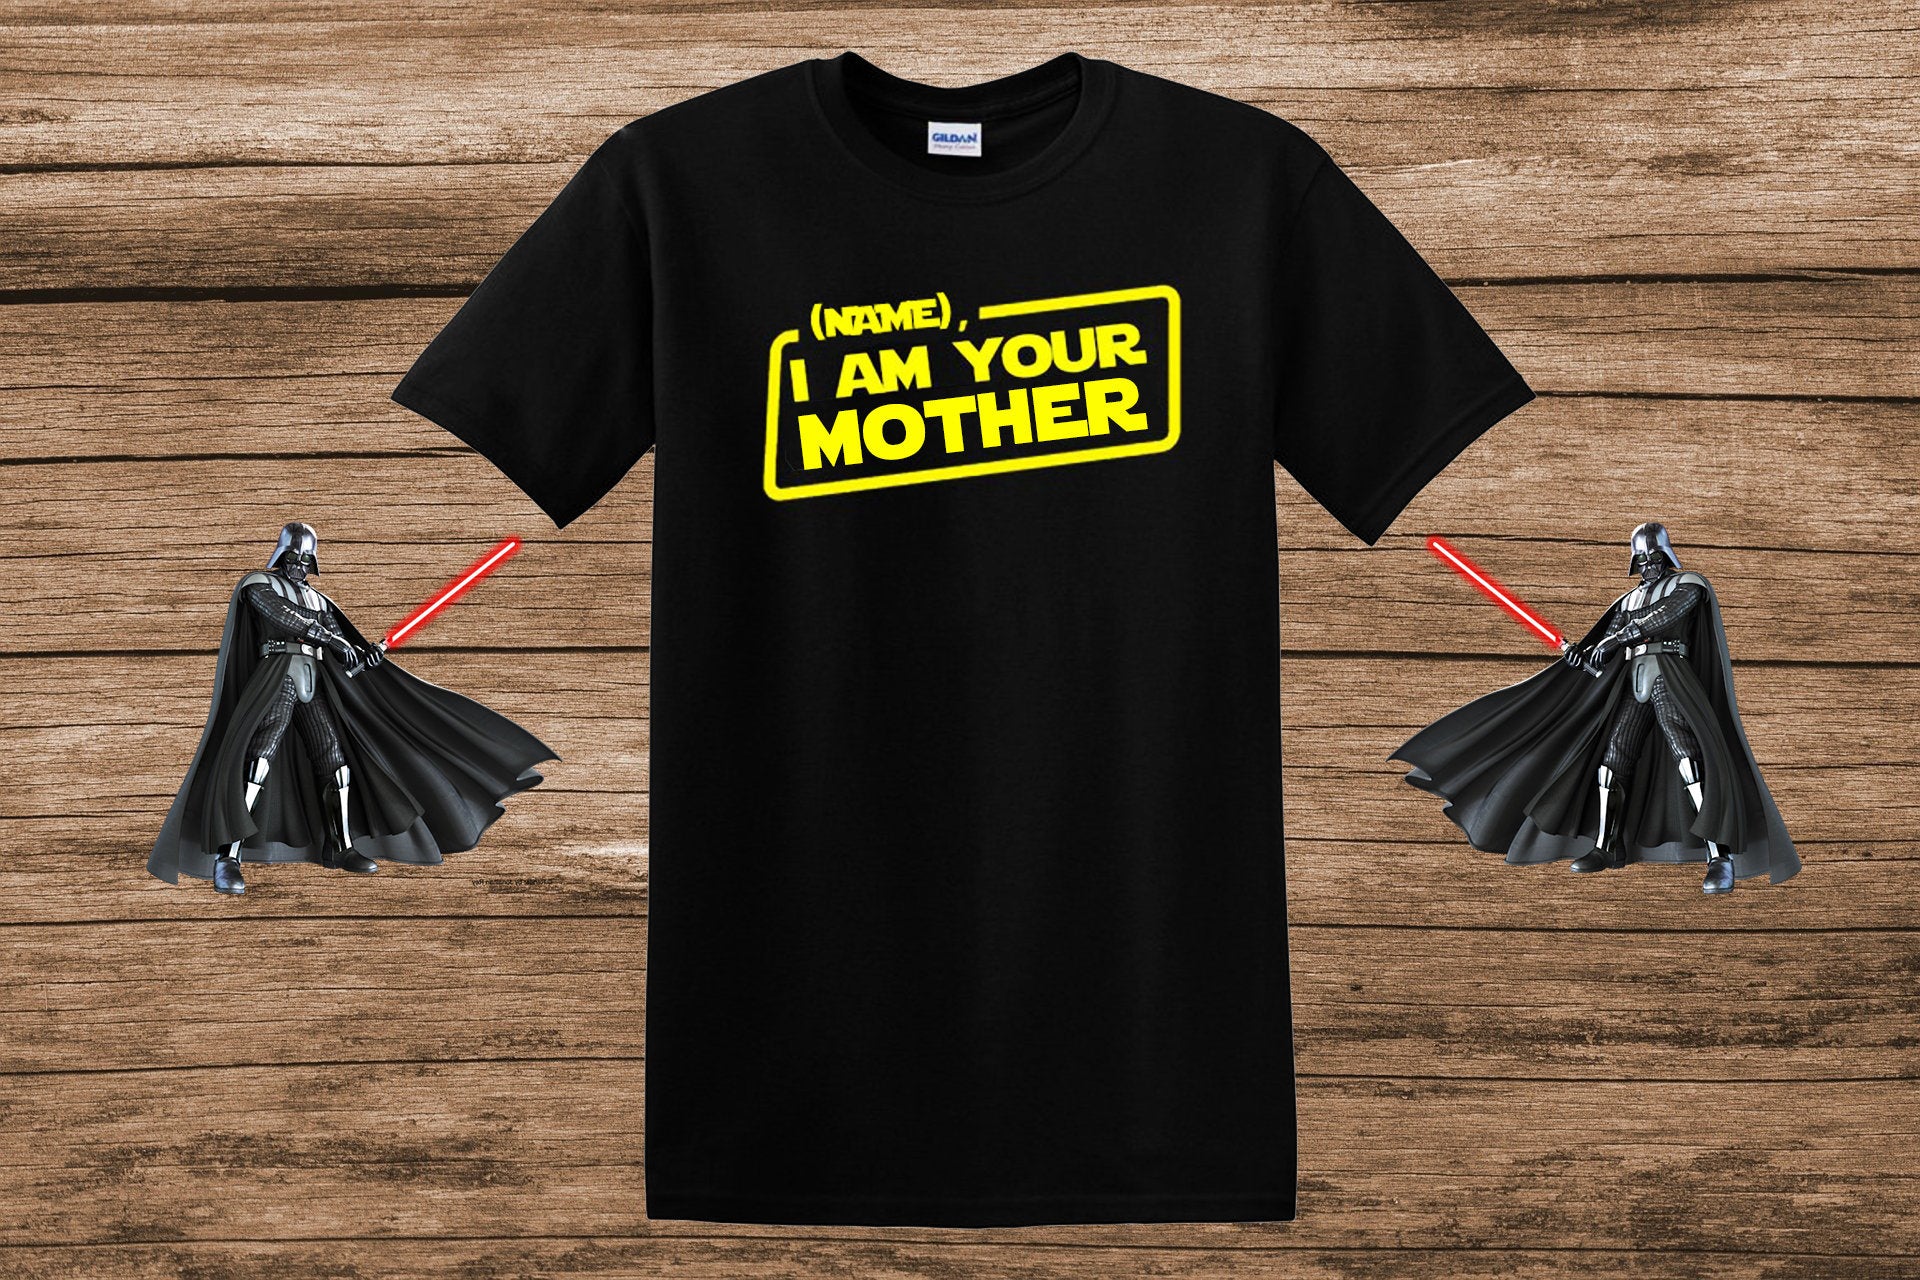 Luke I am your Mother CUSTOM Star Wars Mother's Day gift Mandalorian Matching Mothers Day Princess Leia Han Solo Jedi Princess Rebel Scum